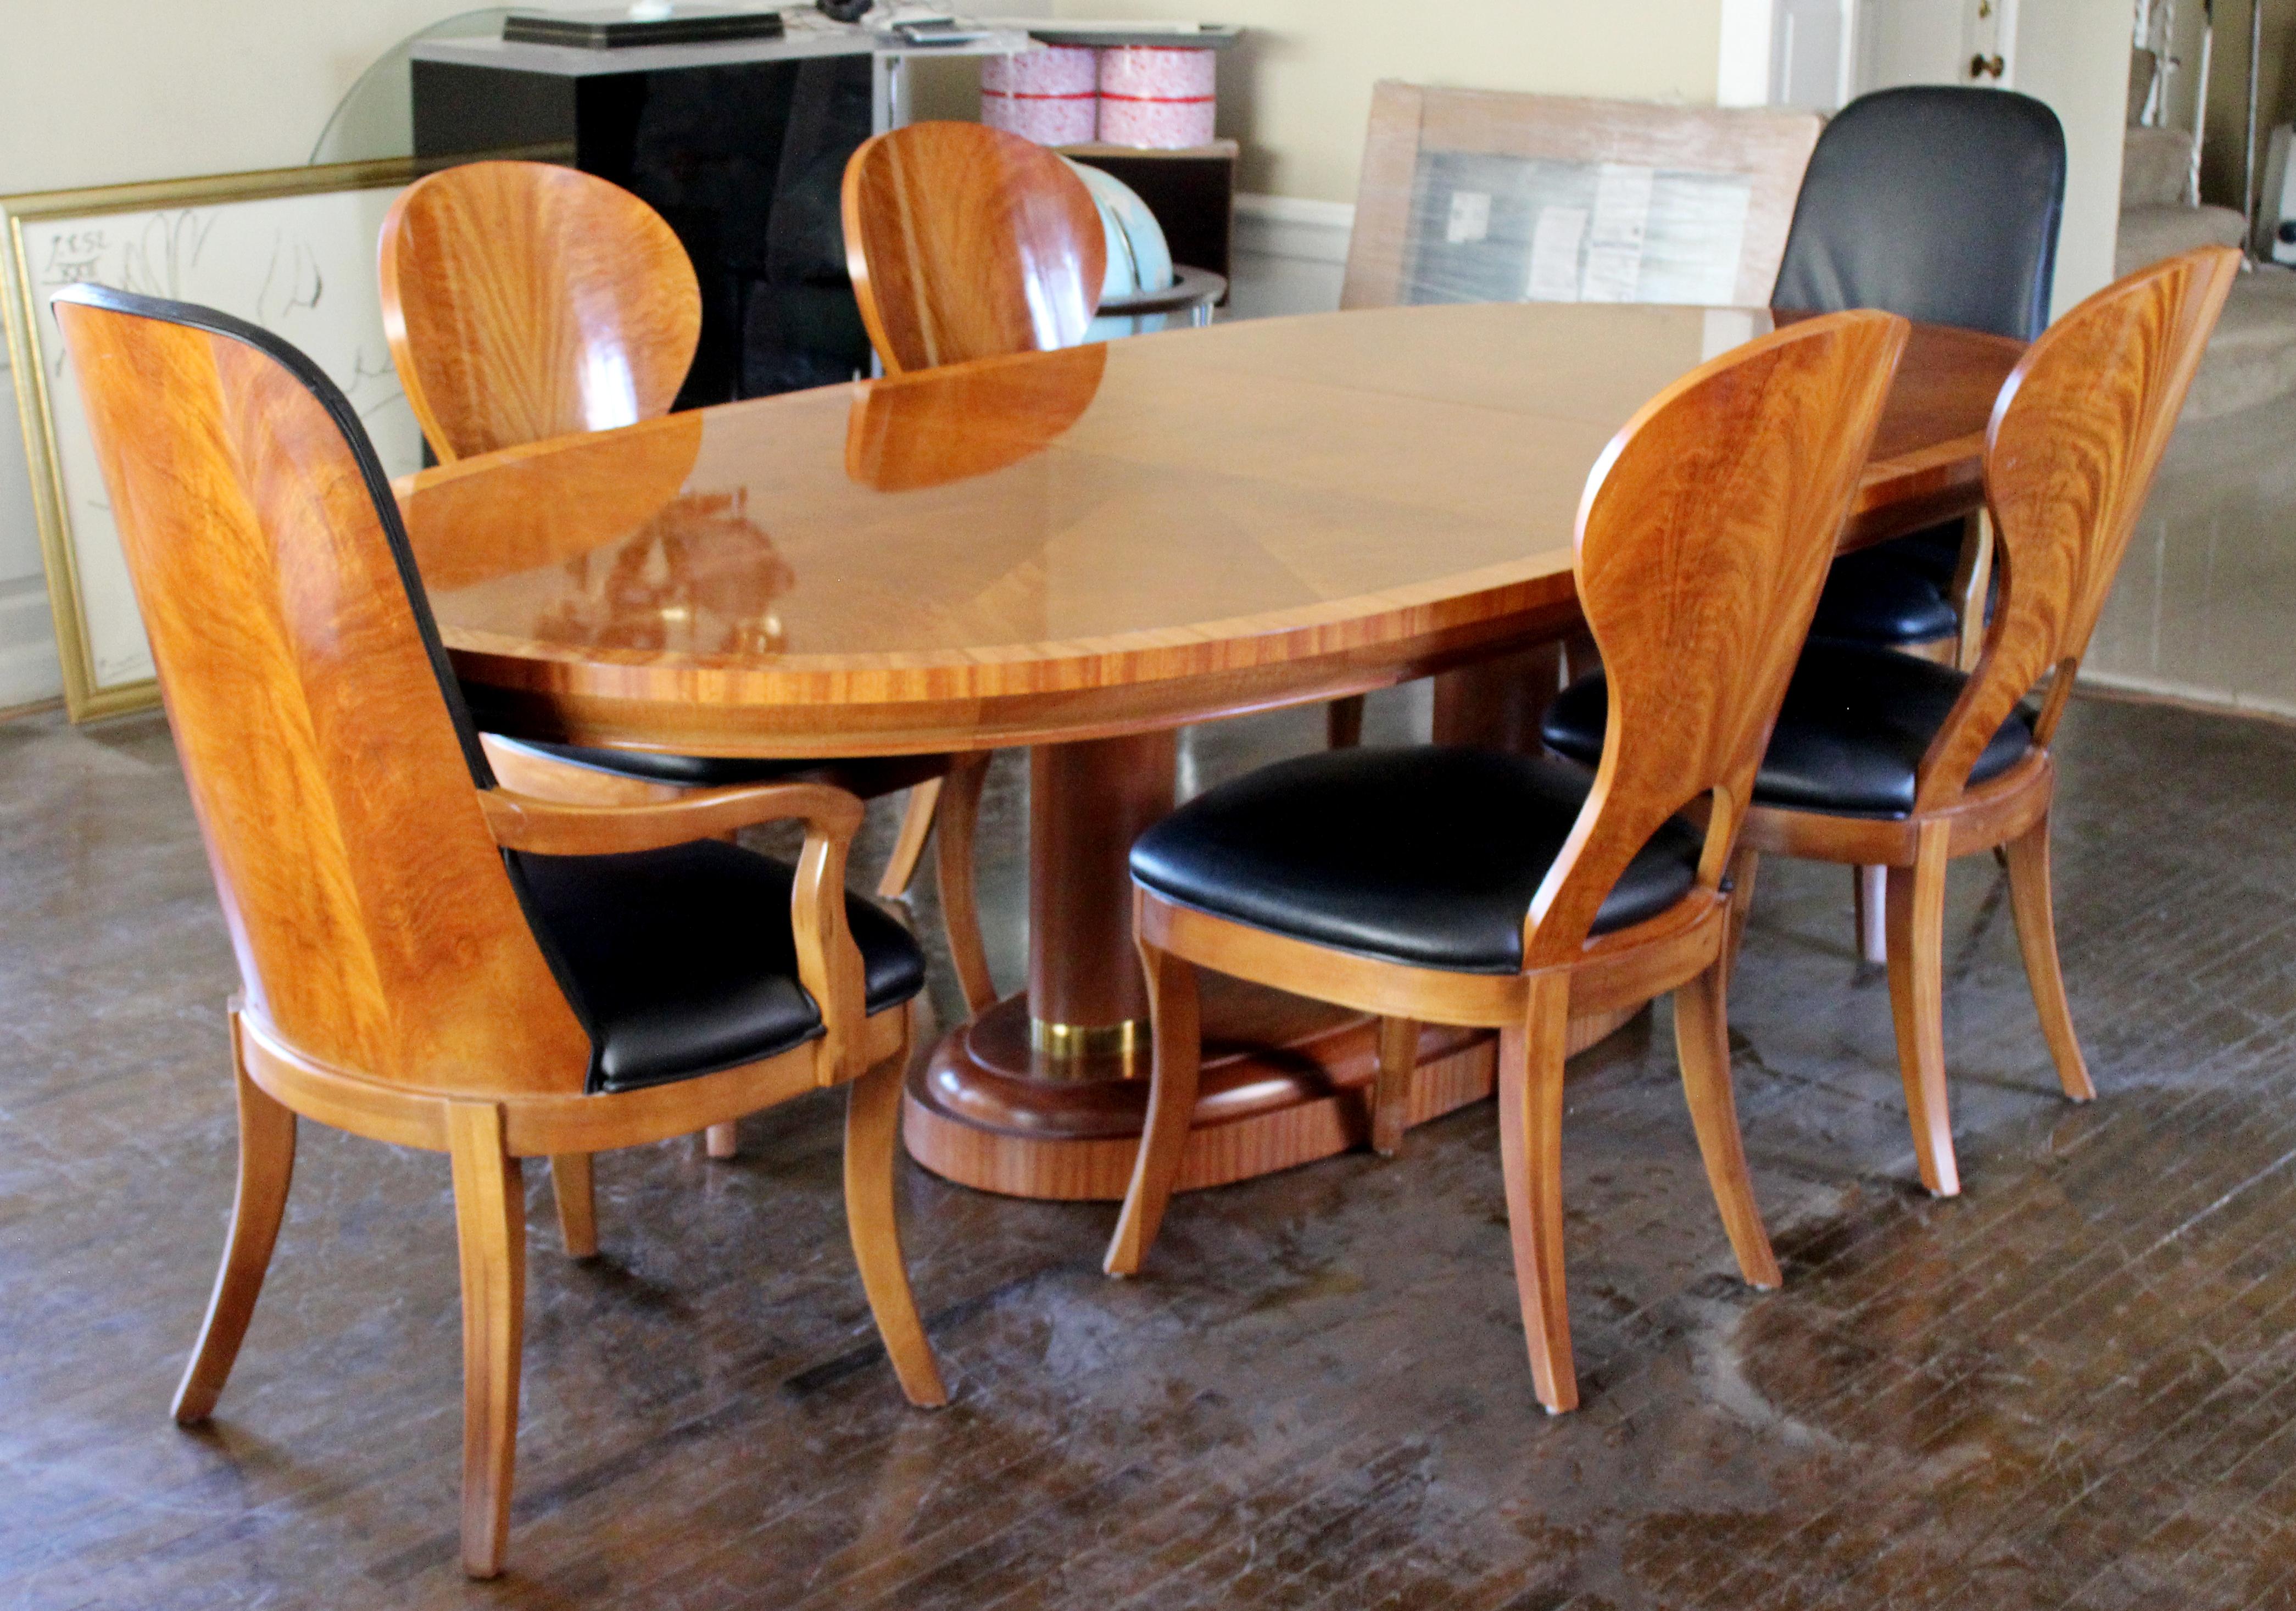 For your consideration is an utterly beath-taking dining set, with an expandable burl wood table and six chairs, two arm and four armless, in the Art Deco style, by Henredon, circa 1990s. In excellent vintage condition. The dimensions of the armless